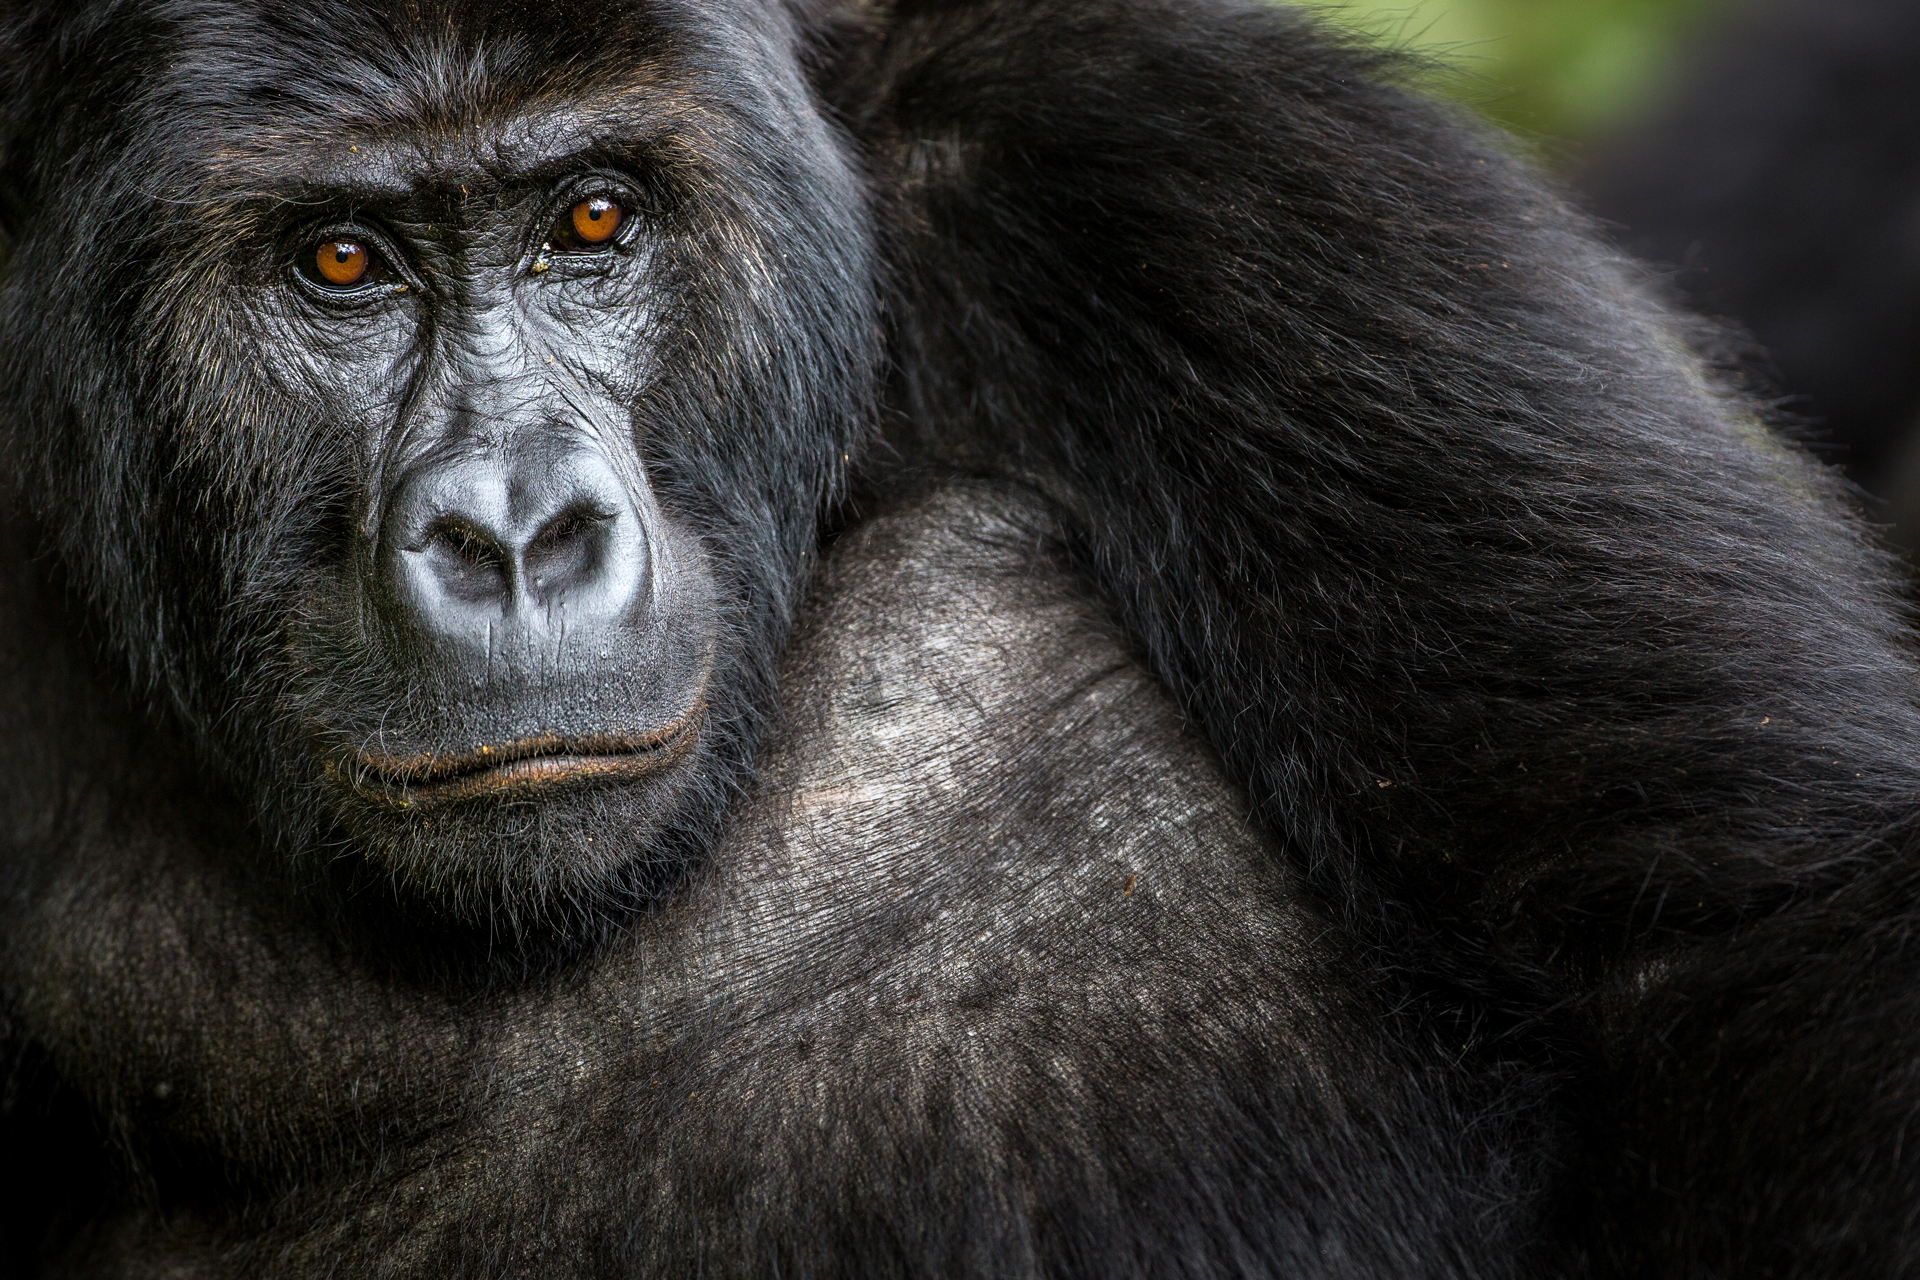 A female Grauer’s gorilla calmly observes the team as it approaches